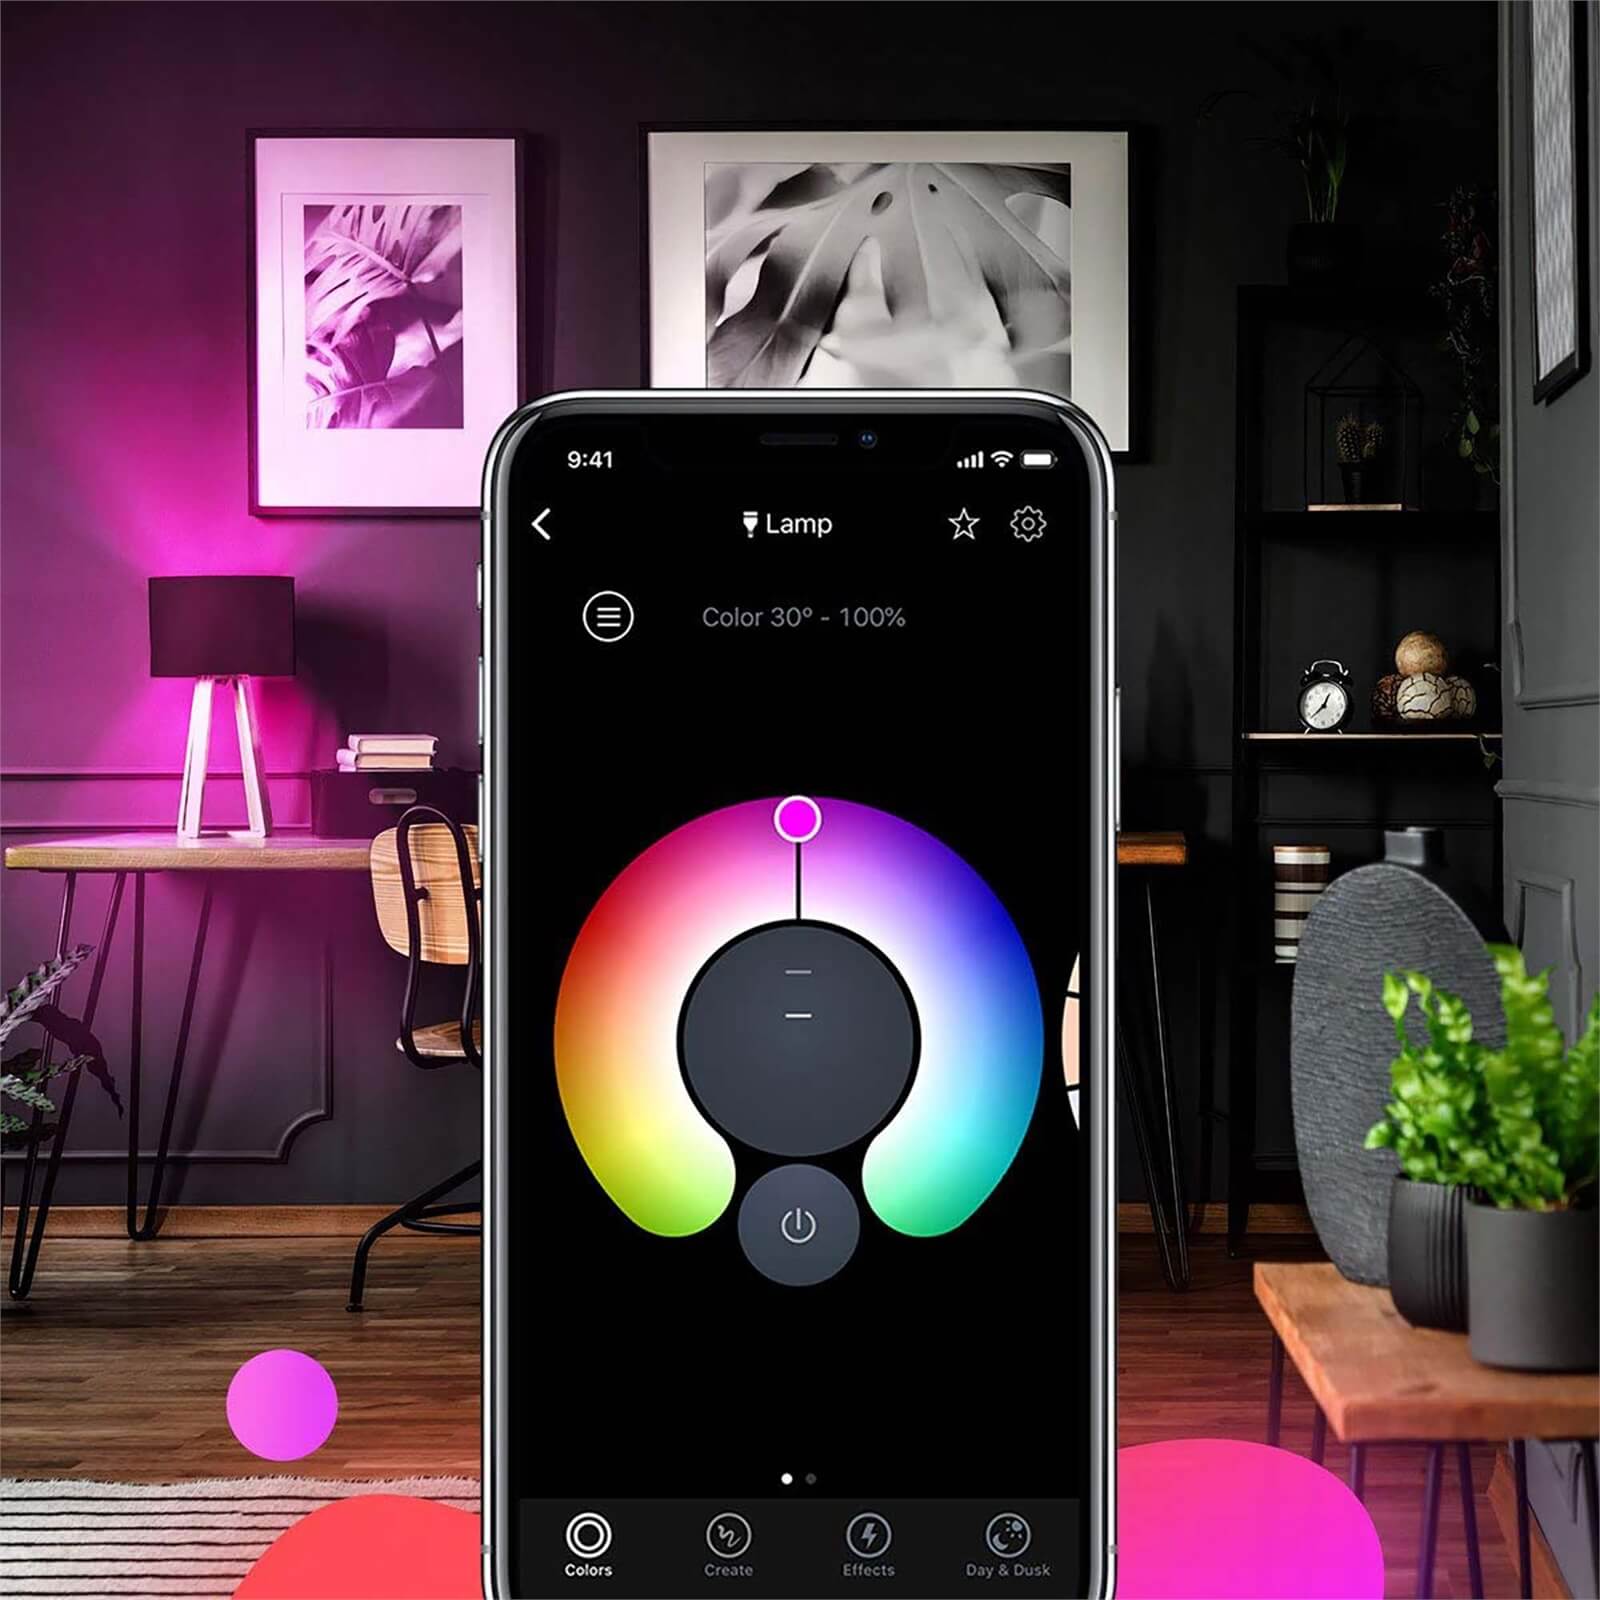 LIFX + (B22) Wi-Fi Smart LED Light Bulb with Infrared for Night Vision